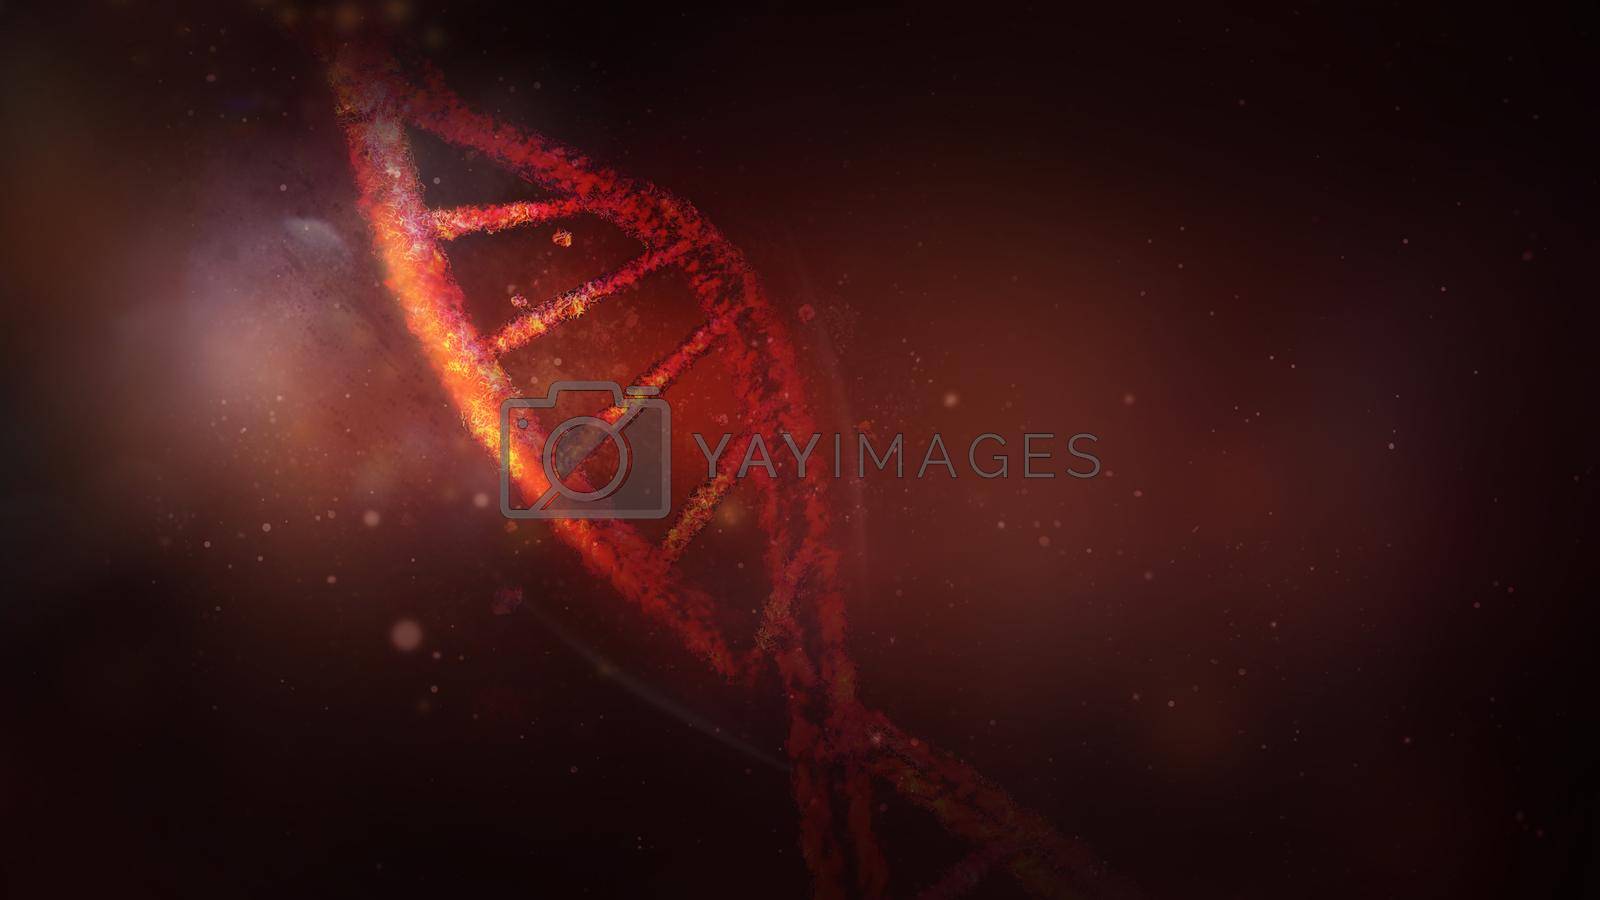 Royalty free image of Damaged DNA strand in virtual space, 3D render. by ConceptCafe